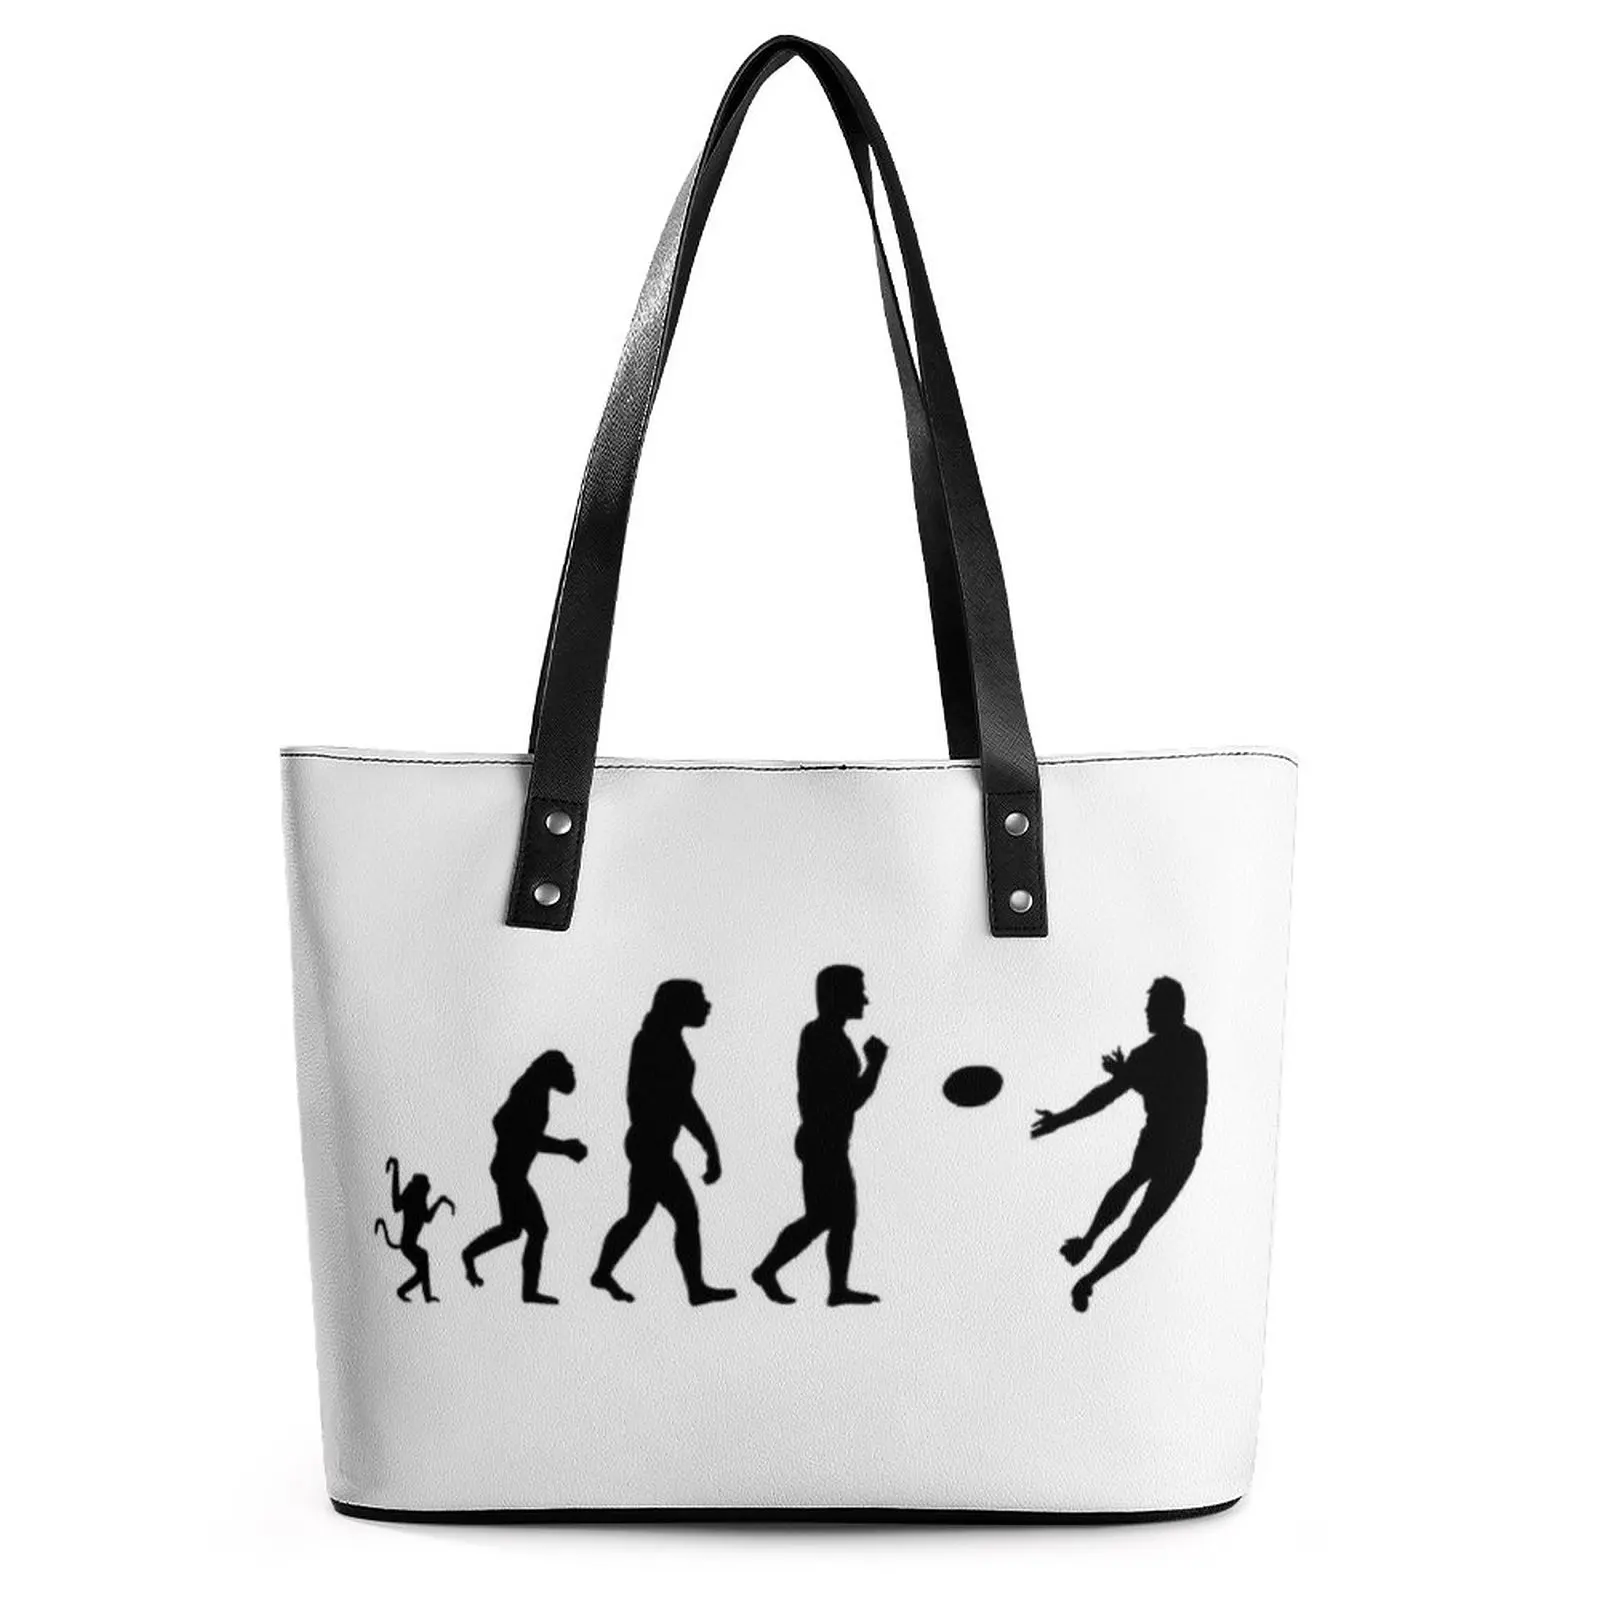 

Rugby Evolution Handbags Lady Football Game Union Six Nations Tote Bag Stylish Grocery Shoulder Bag Graphic Design Shopper Bags